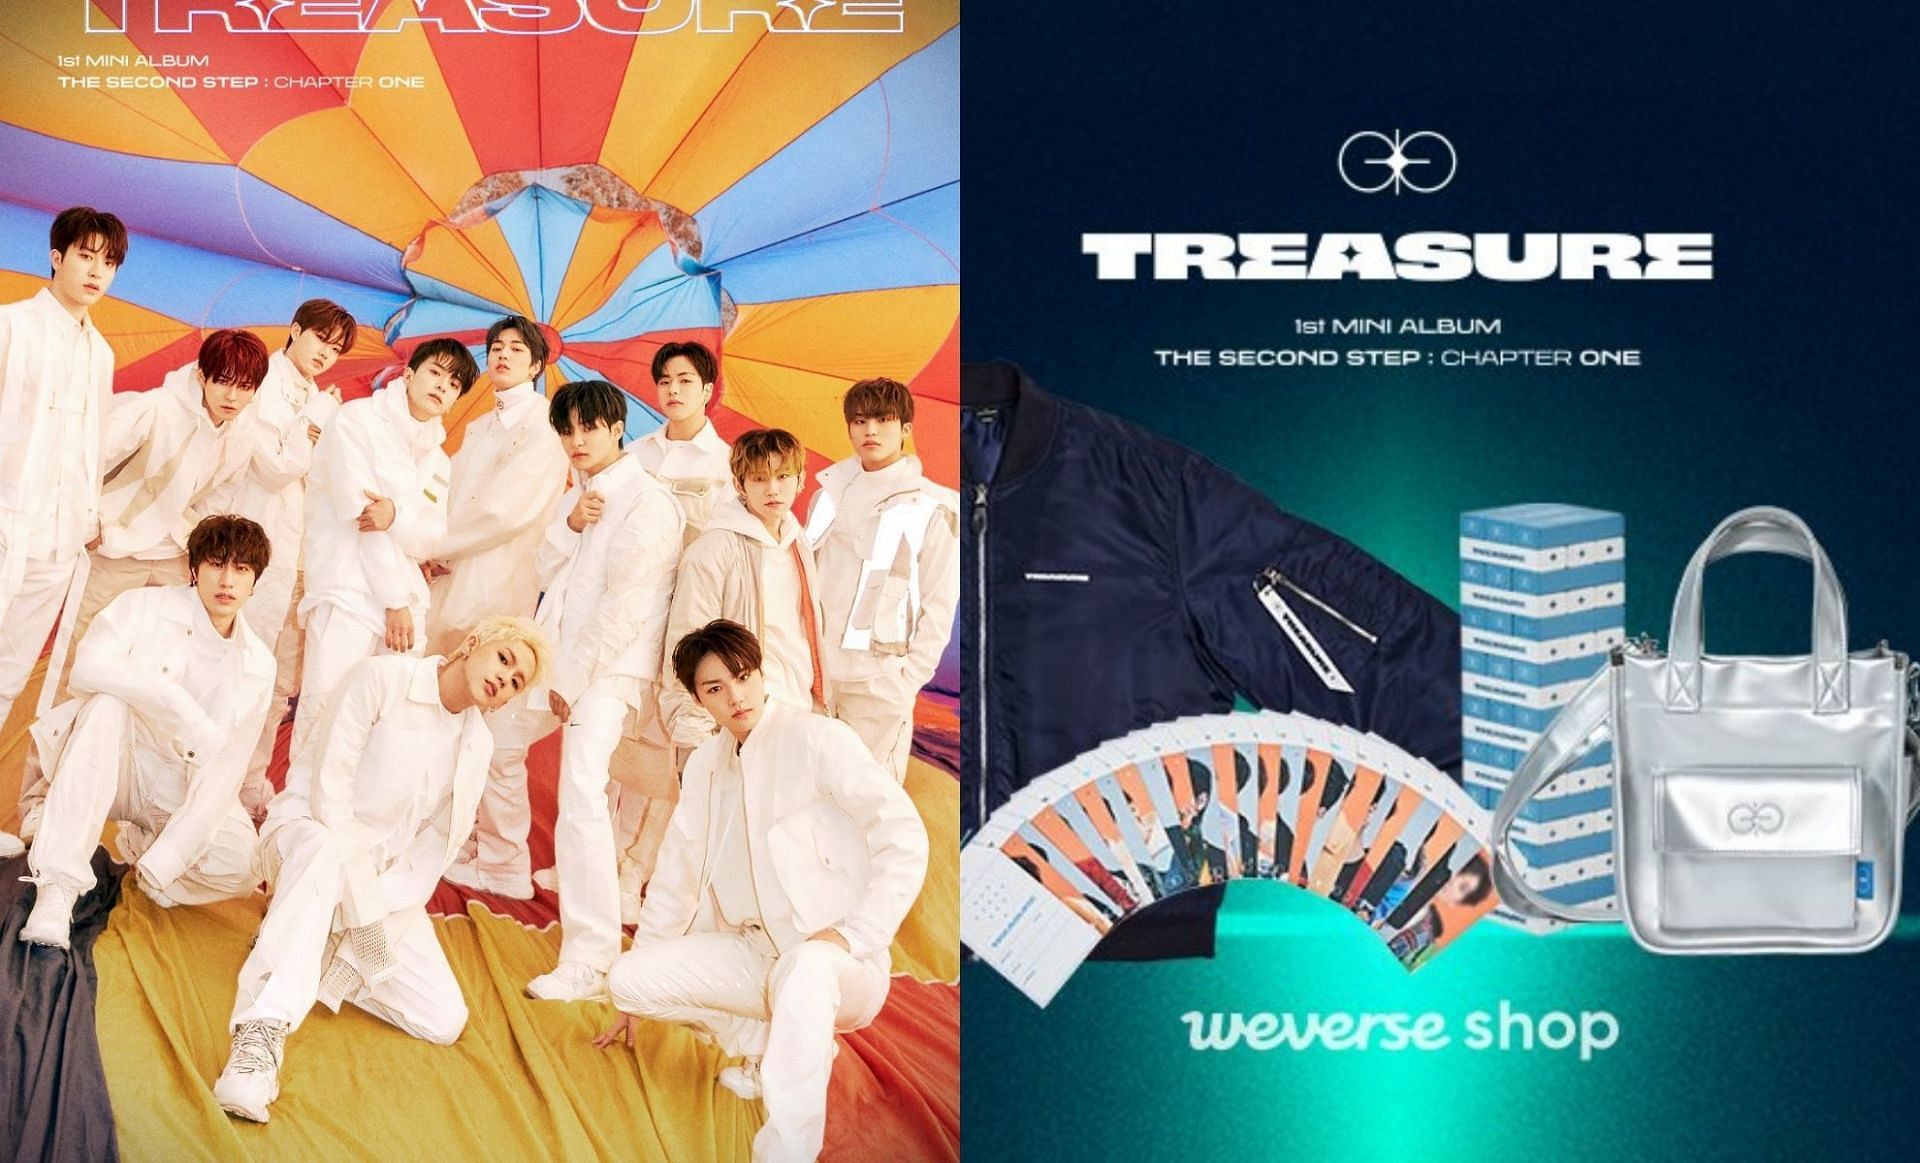 TREASURE album concept photo and merch (Images via @ygfamily and @weverseshop/Twitter)